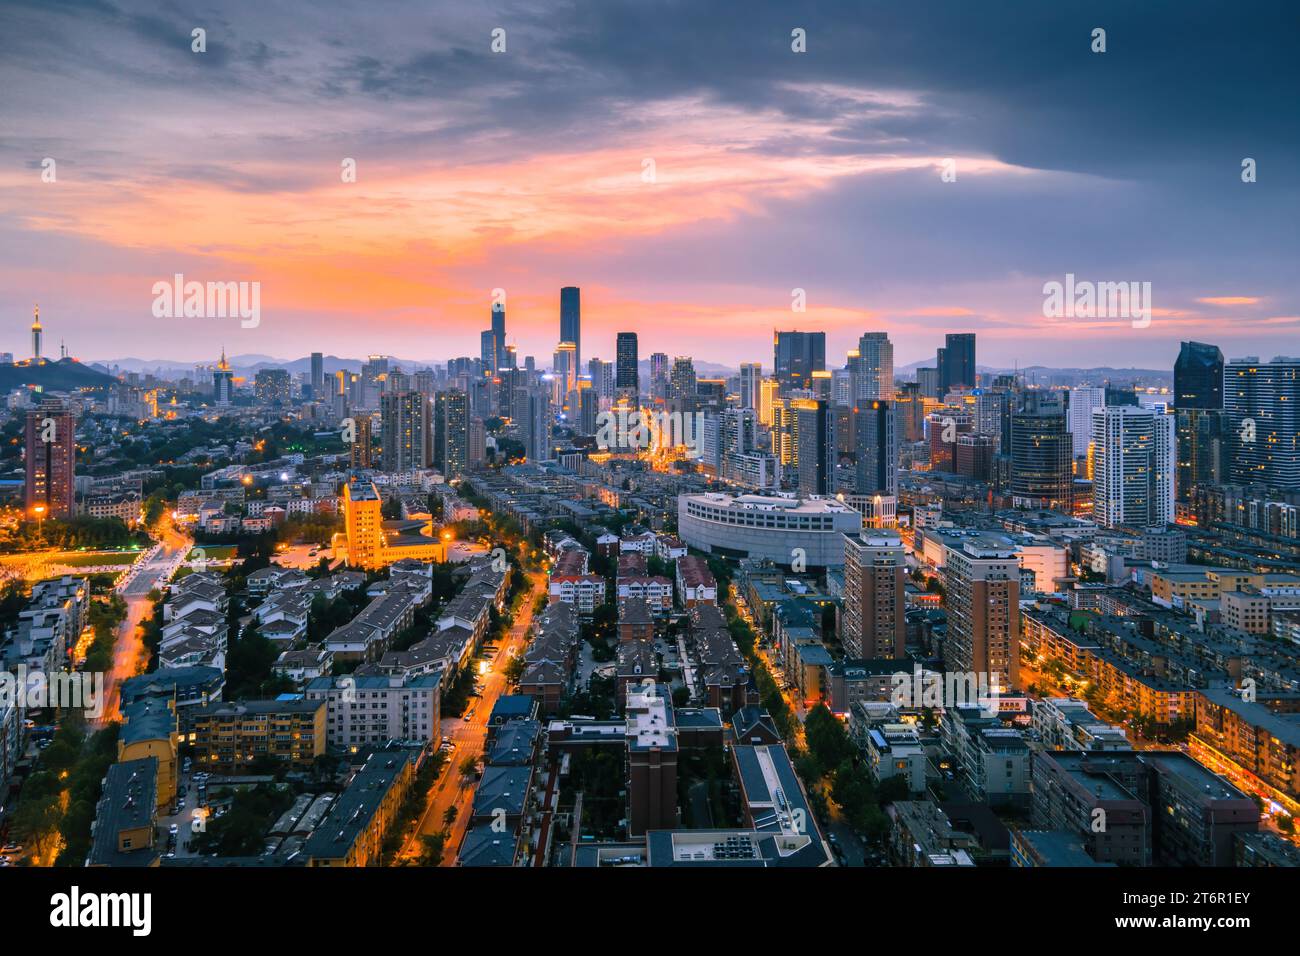 An aerial view of the stunning city skyline illuminated by the setting sun in Dalian, China Stock Photo